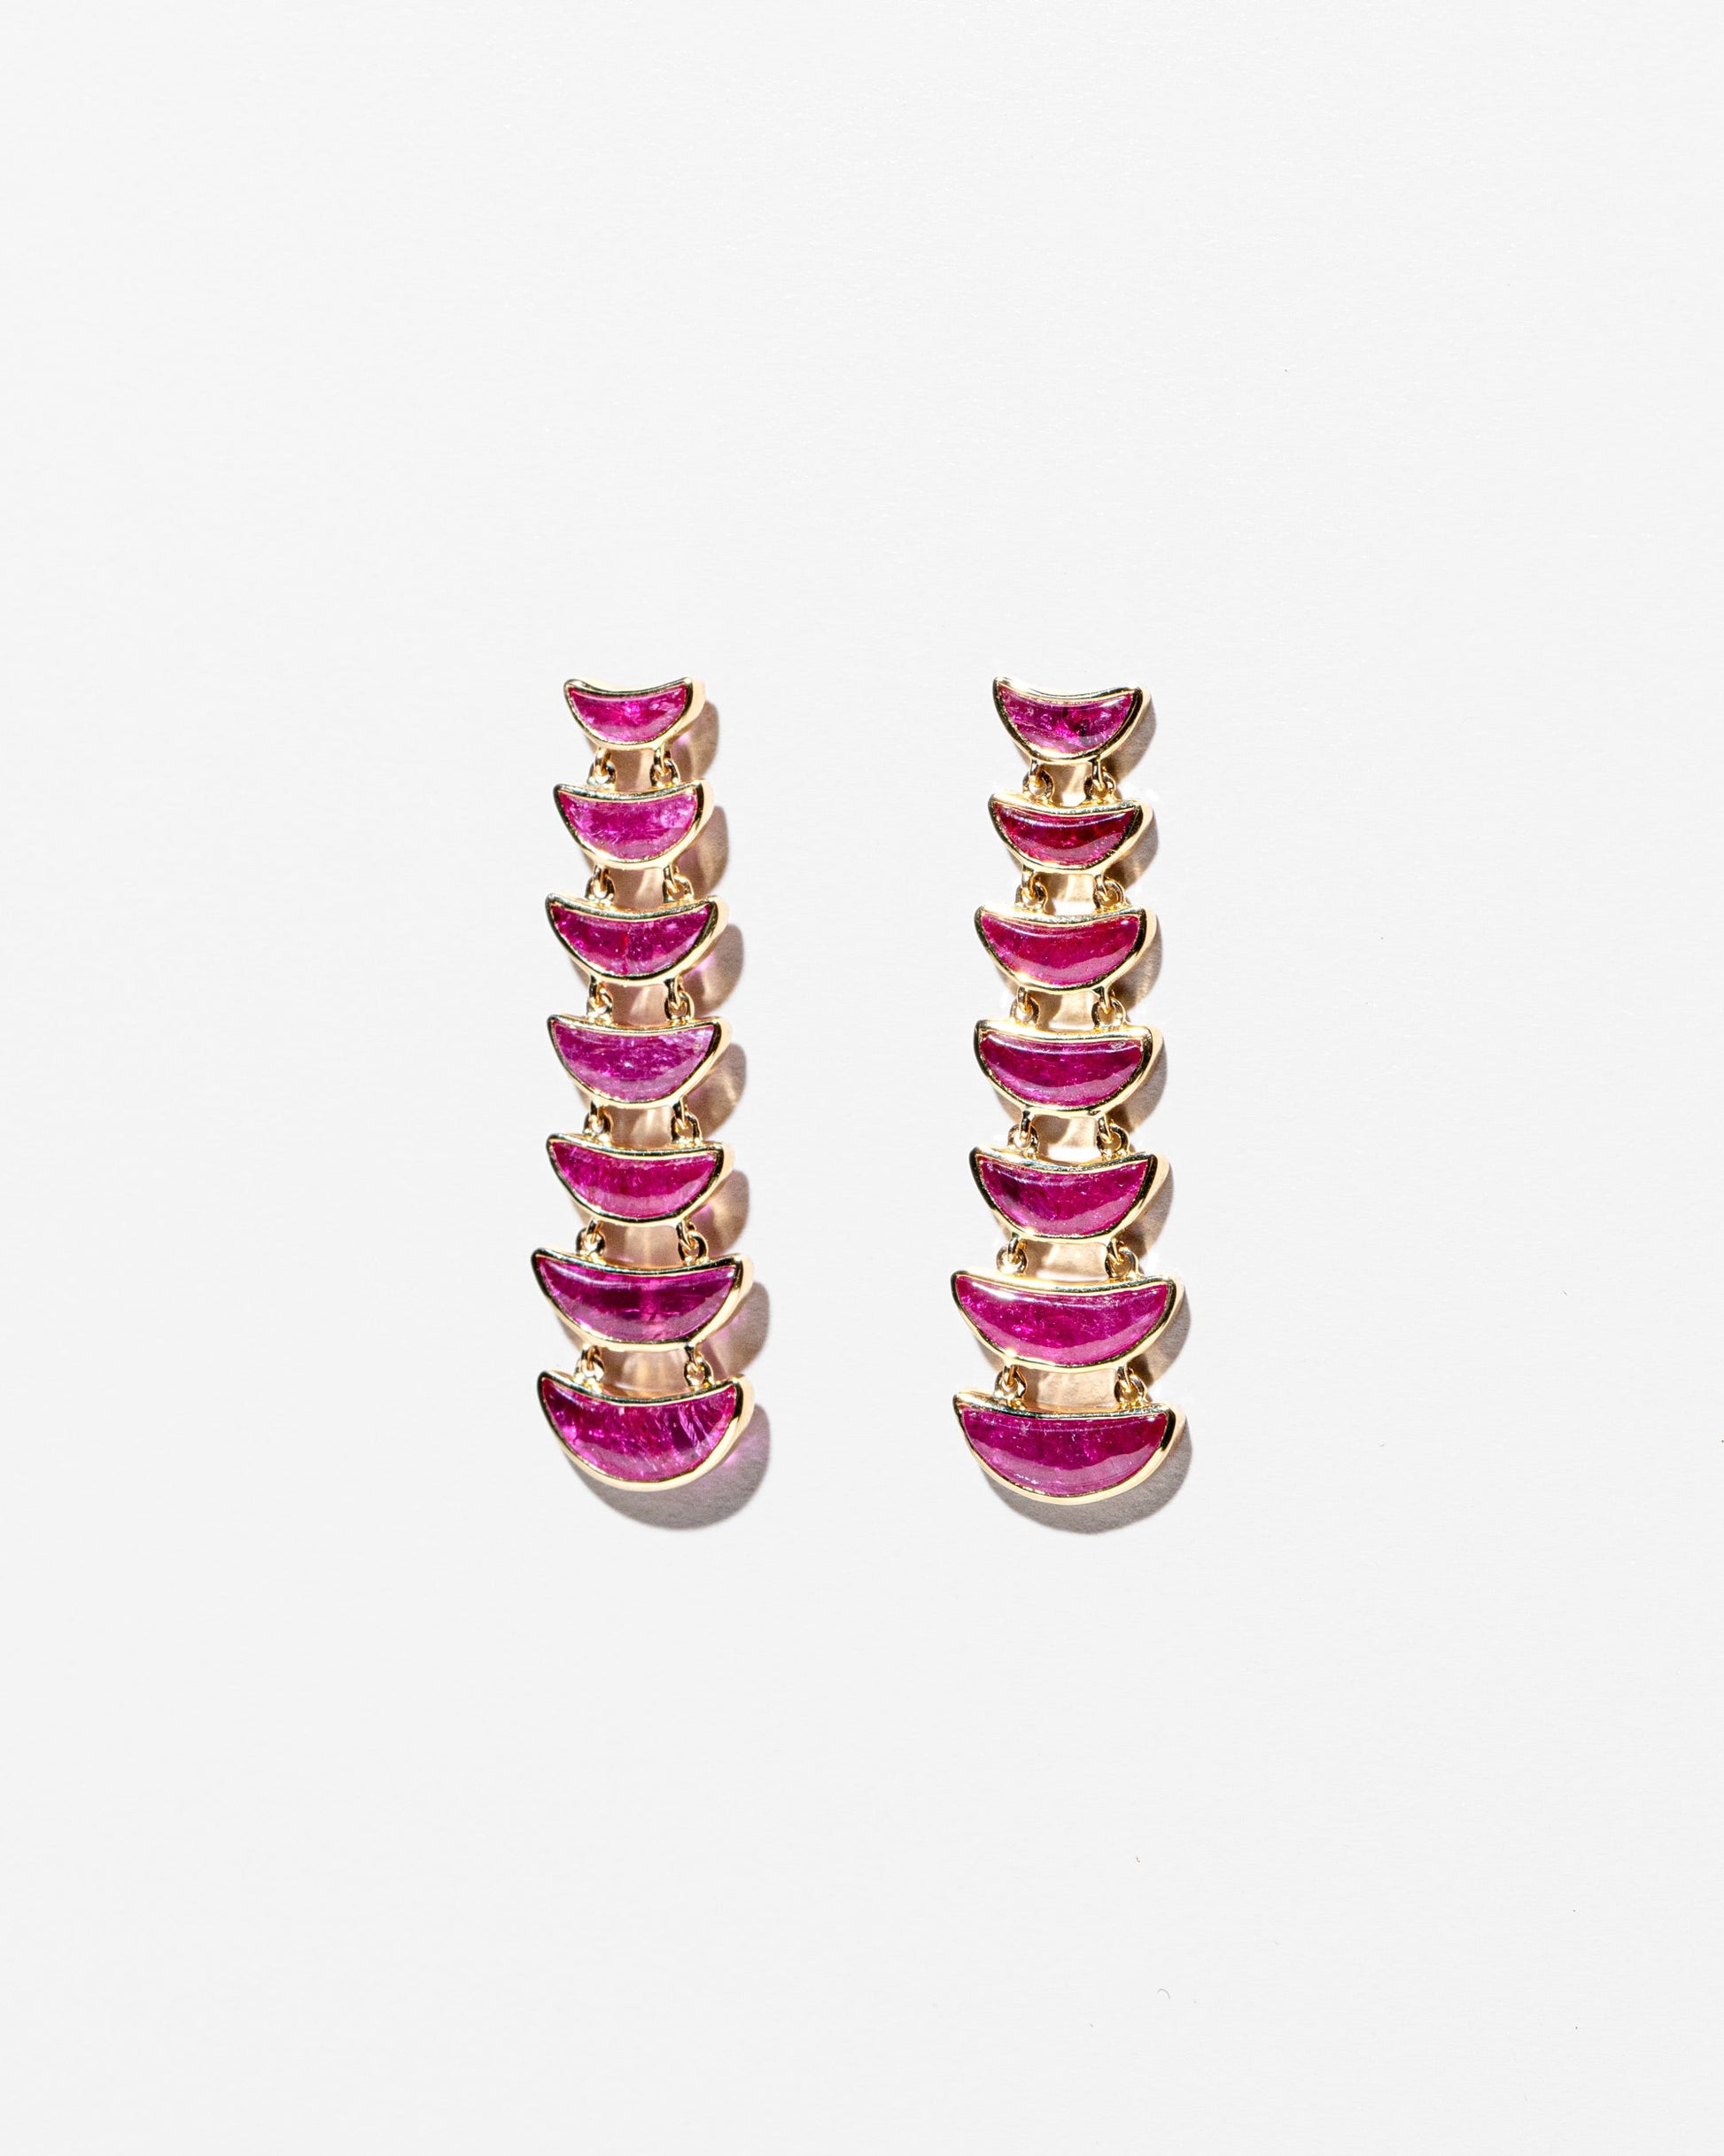  Flame Earrings on light color background.